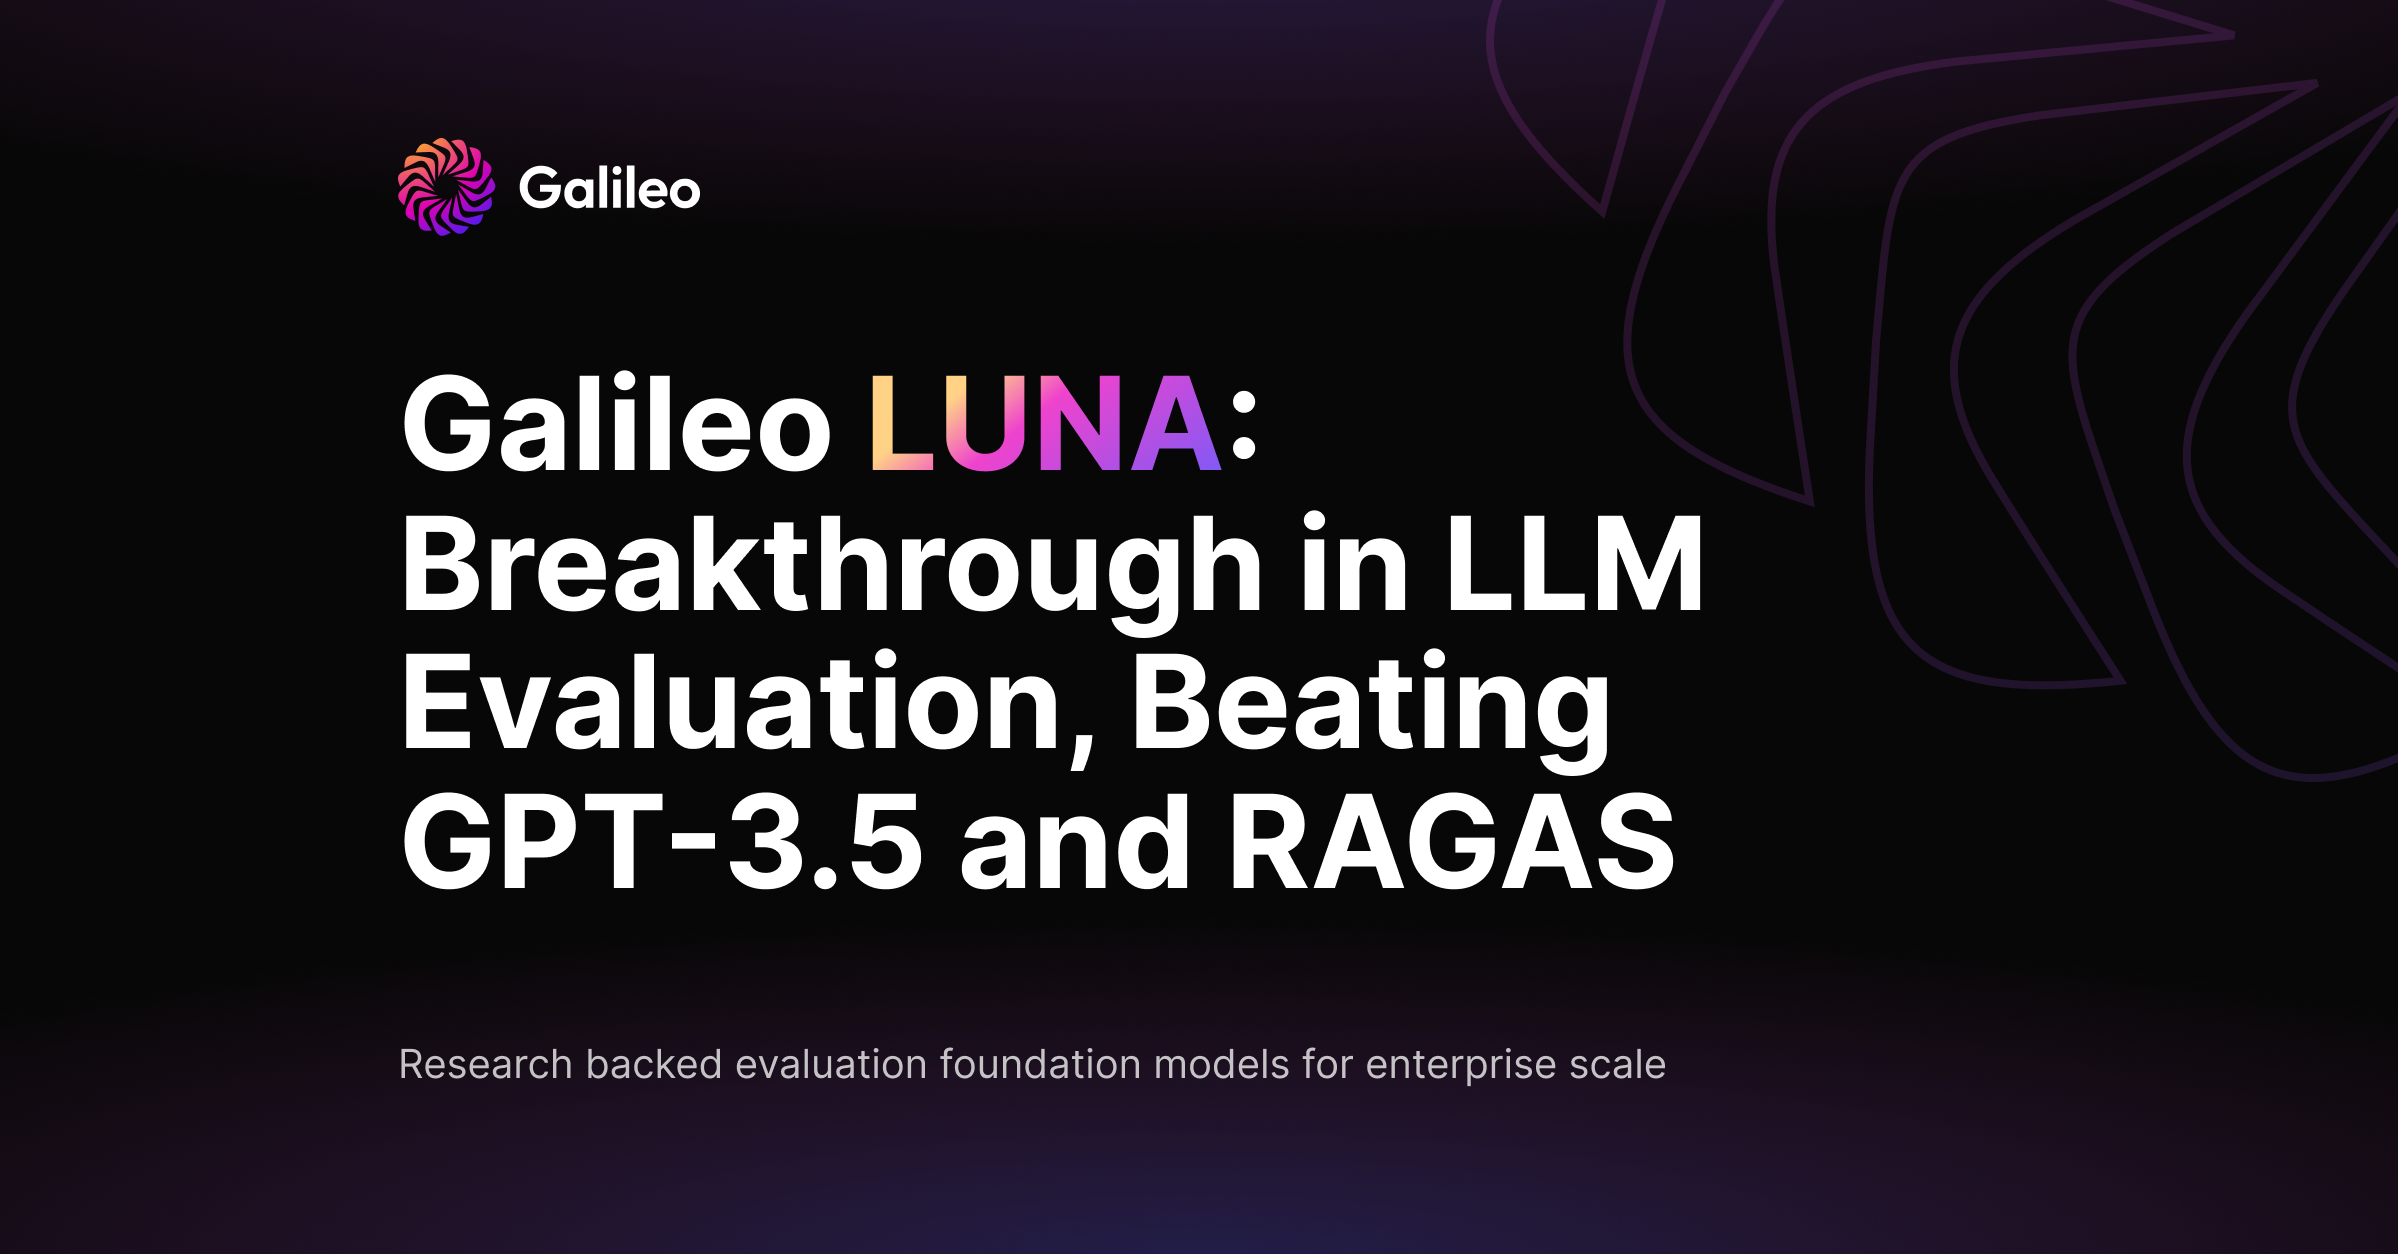 Galileo Luna: Breakthrough in LLM Evaluation, Beating GPT-3.5 and RAGAS